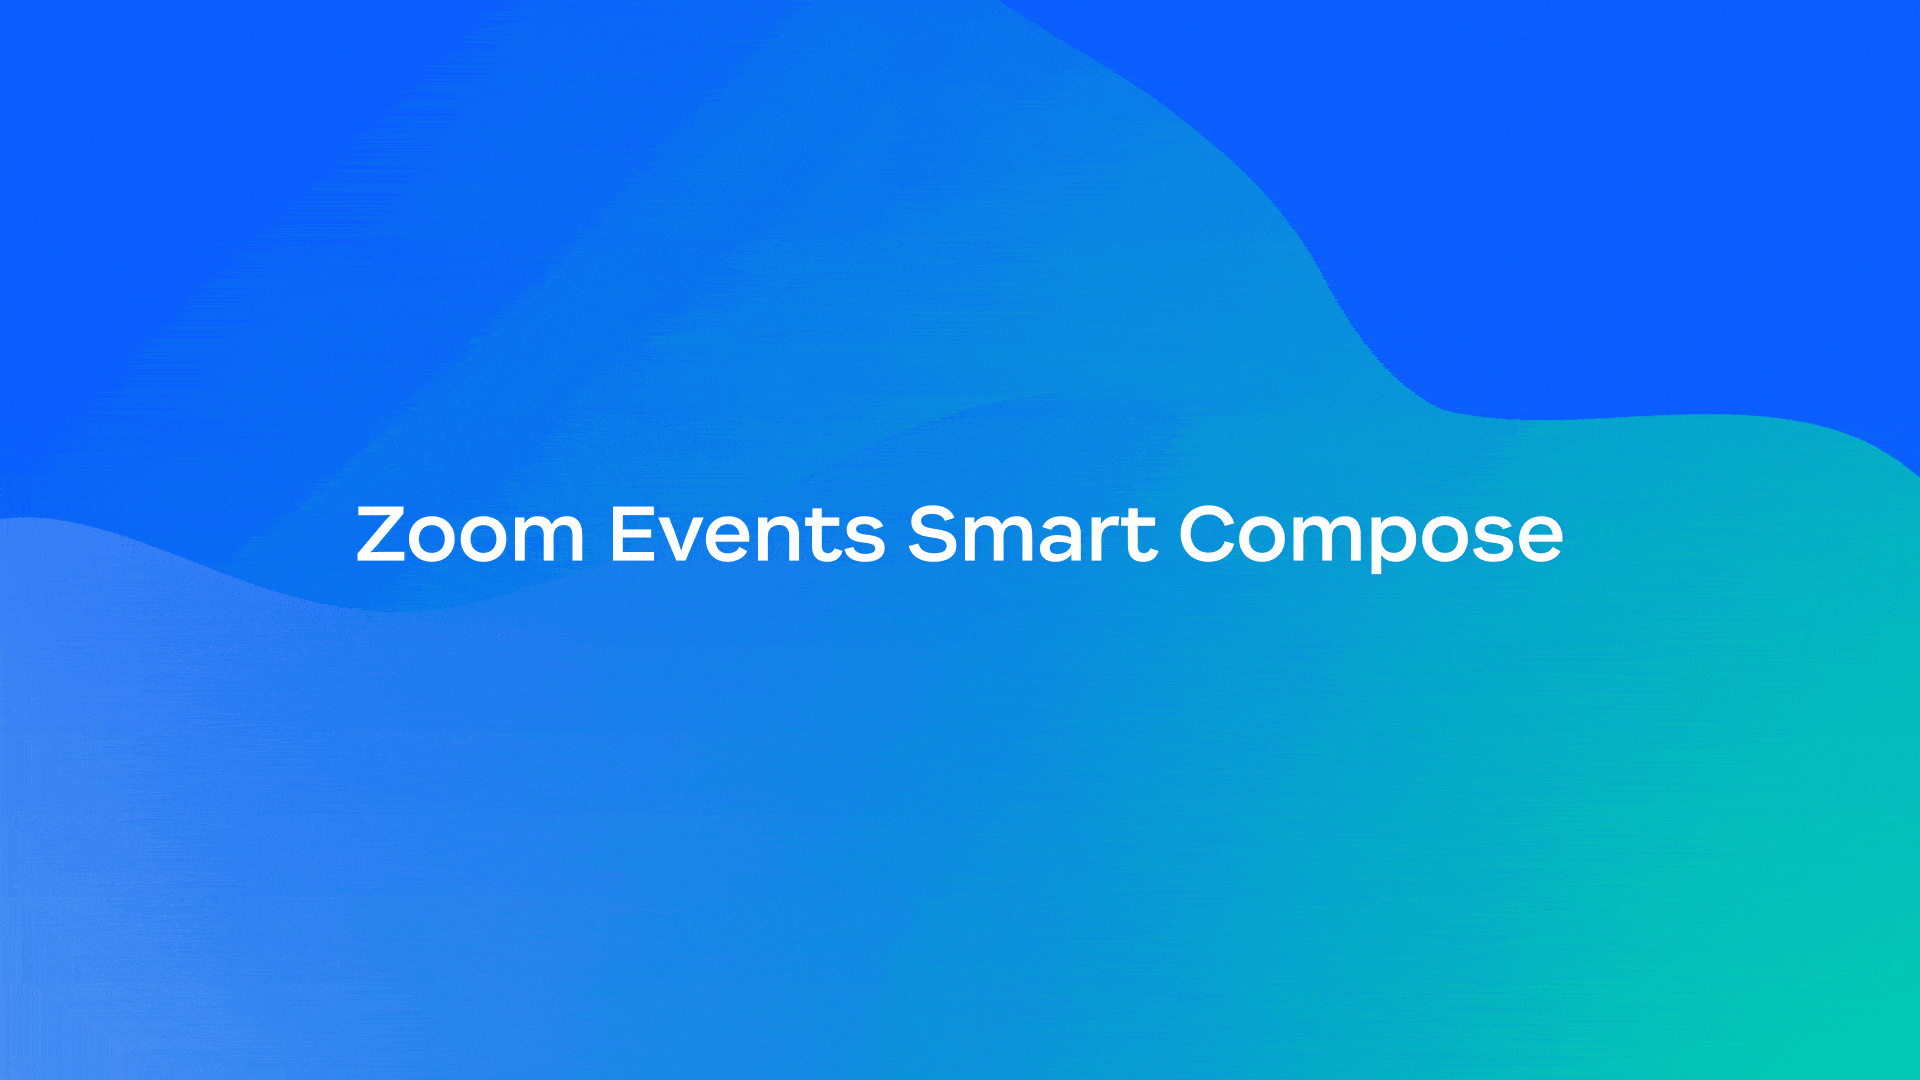 Zoom events smart compose